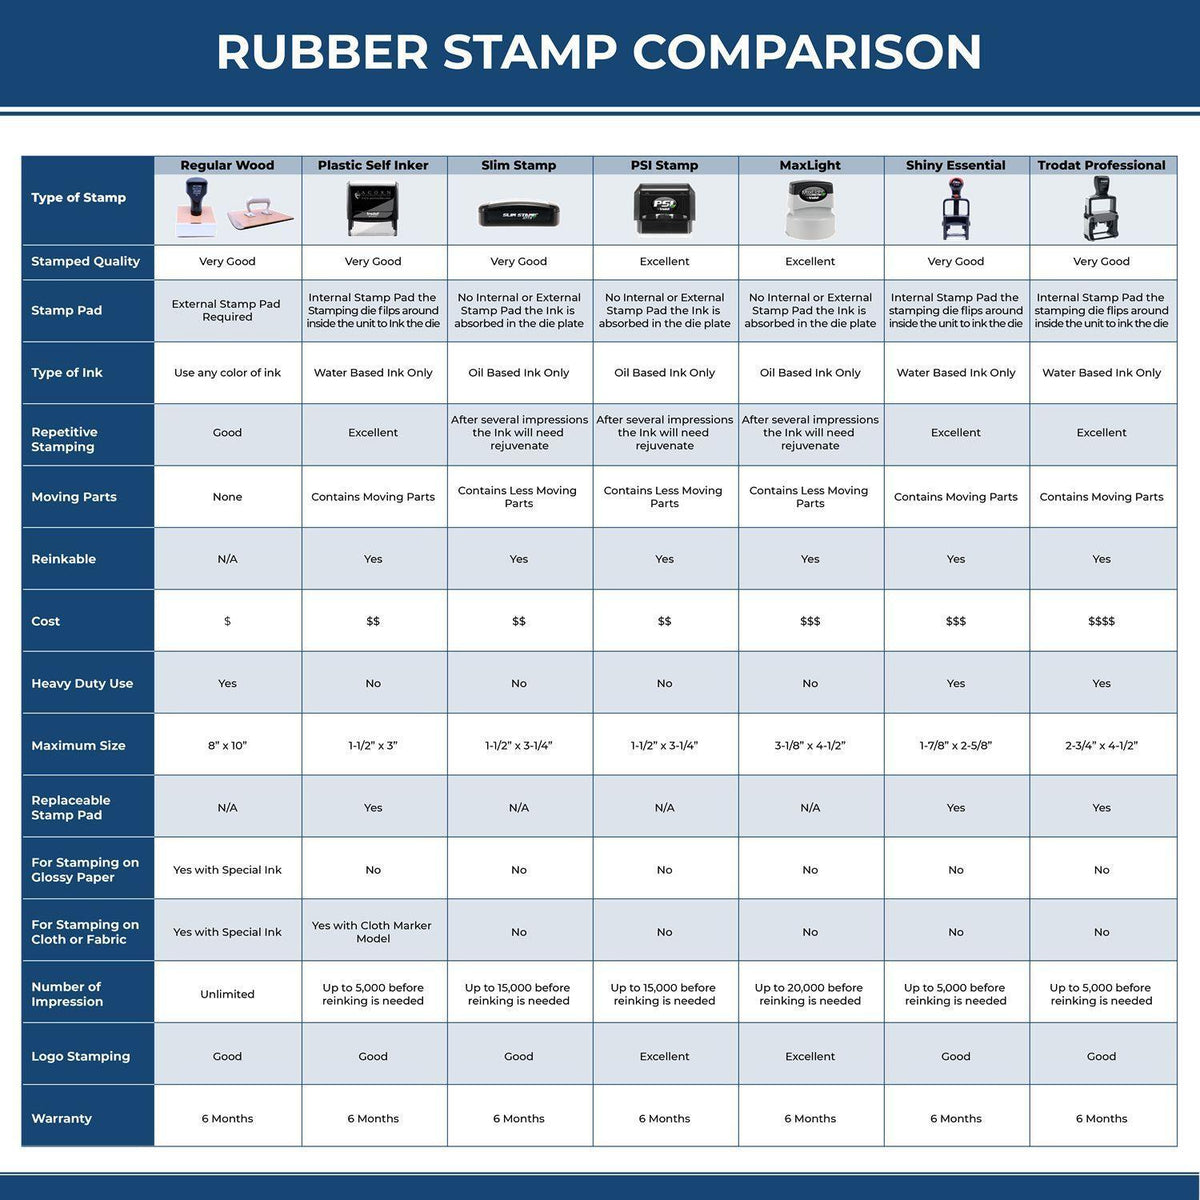 Large Cleaned and Sanitized Rubber Stamp 5516R Rubber Stamp Comparison